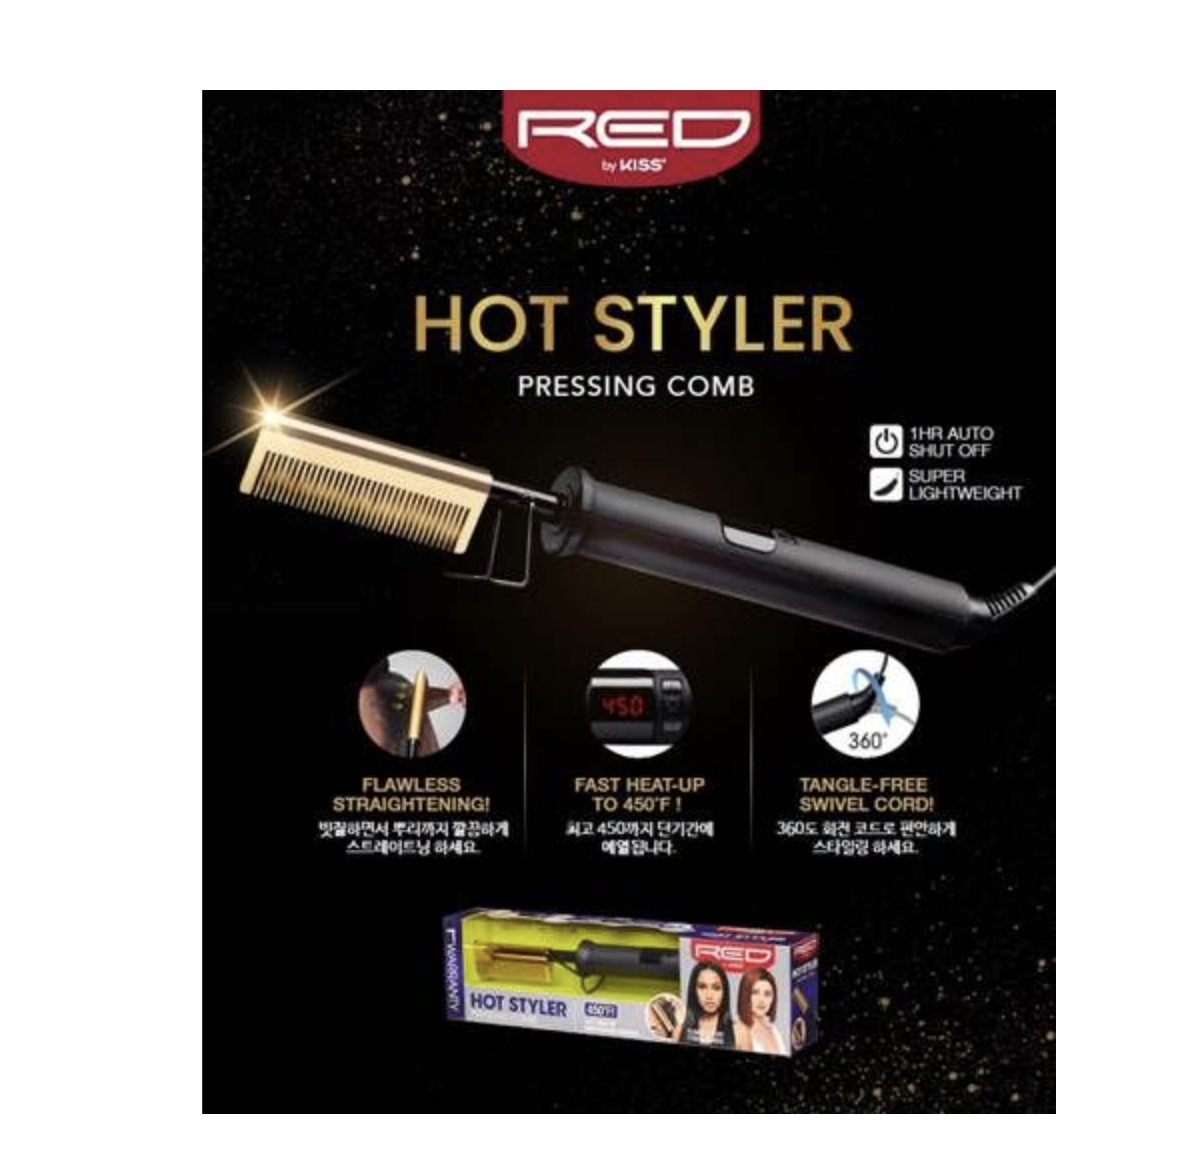 Red Hot Styler Pressing Comb #HC01 - BPolished Beauty Supply